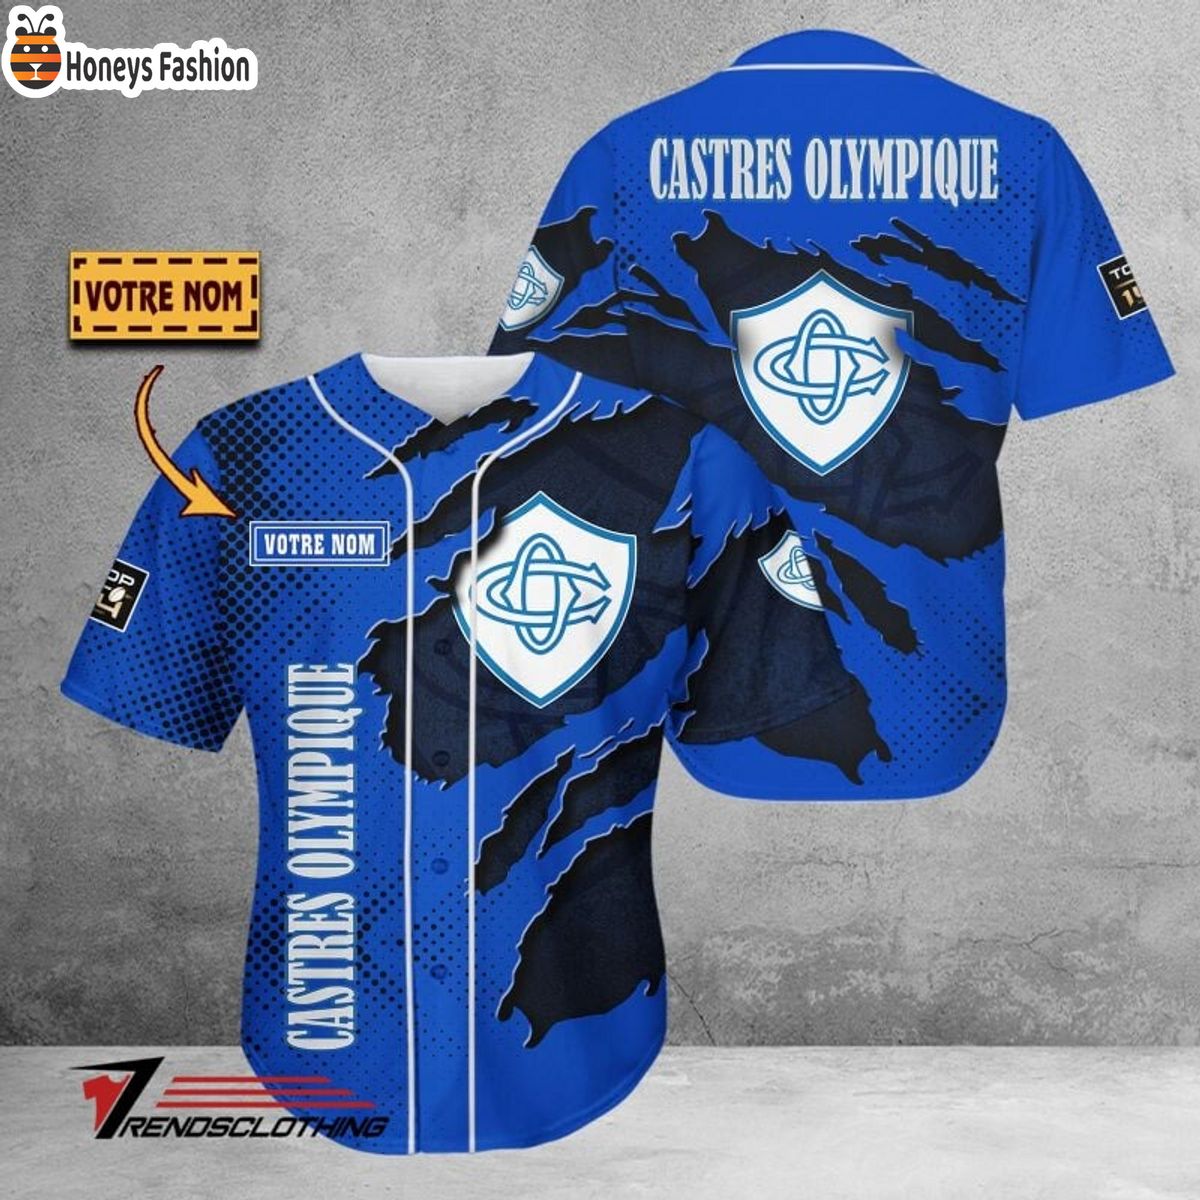 Castres Olympique Personalized Baseball Jersey